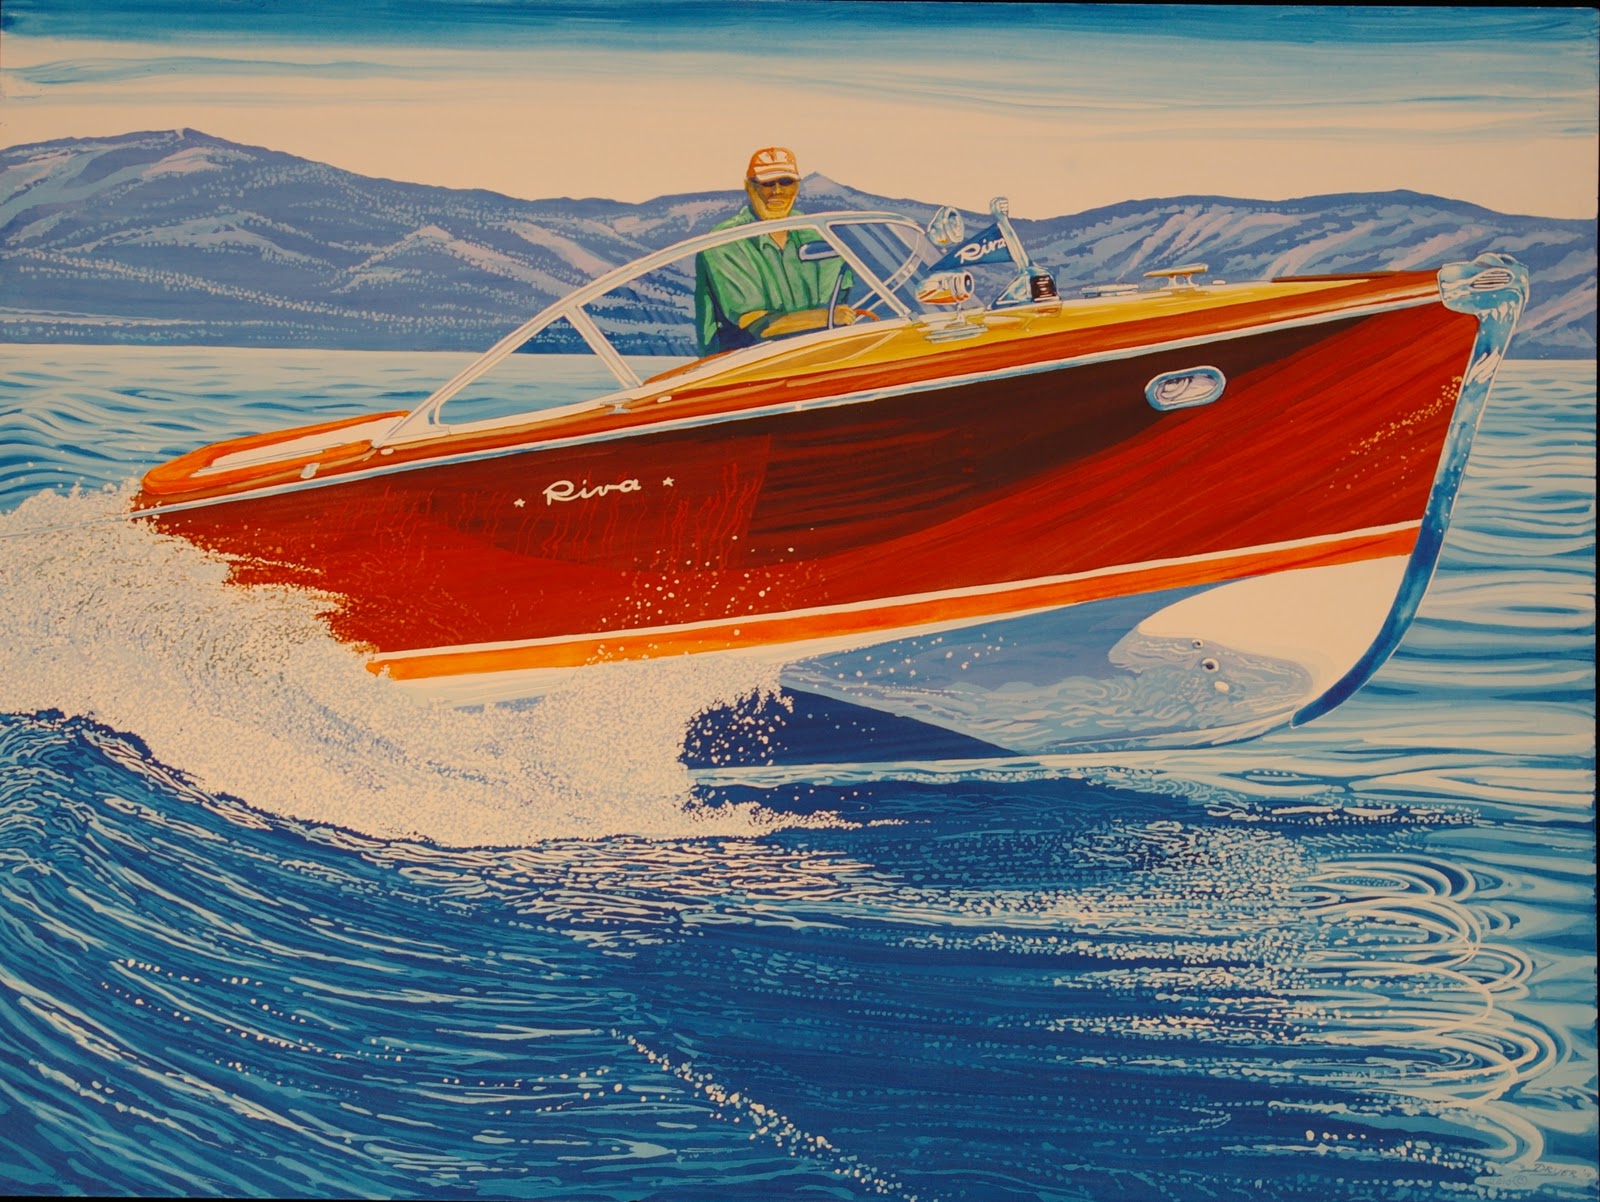 Roy Dryer -The Classic, Classic Boat Artist. | Classic ...